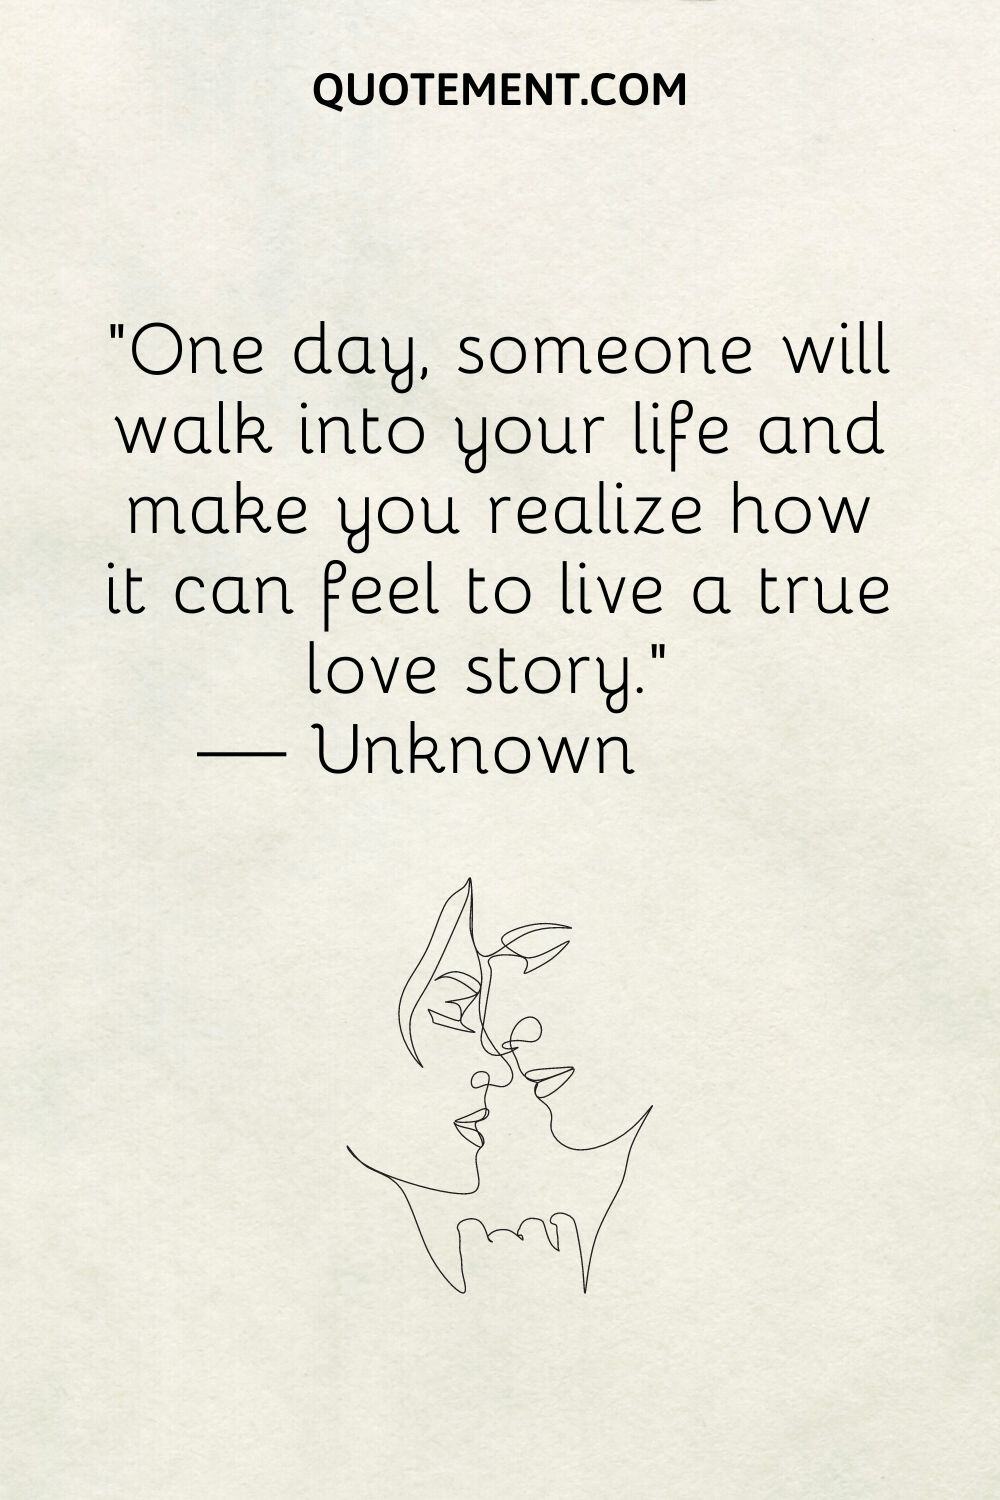 One day, someone will walk into your life and make you realize how it can feel to live a true love story